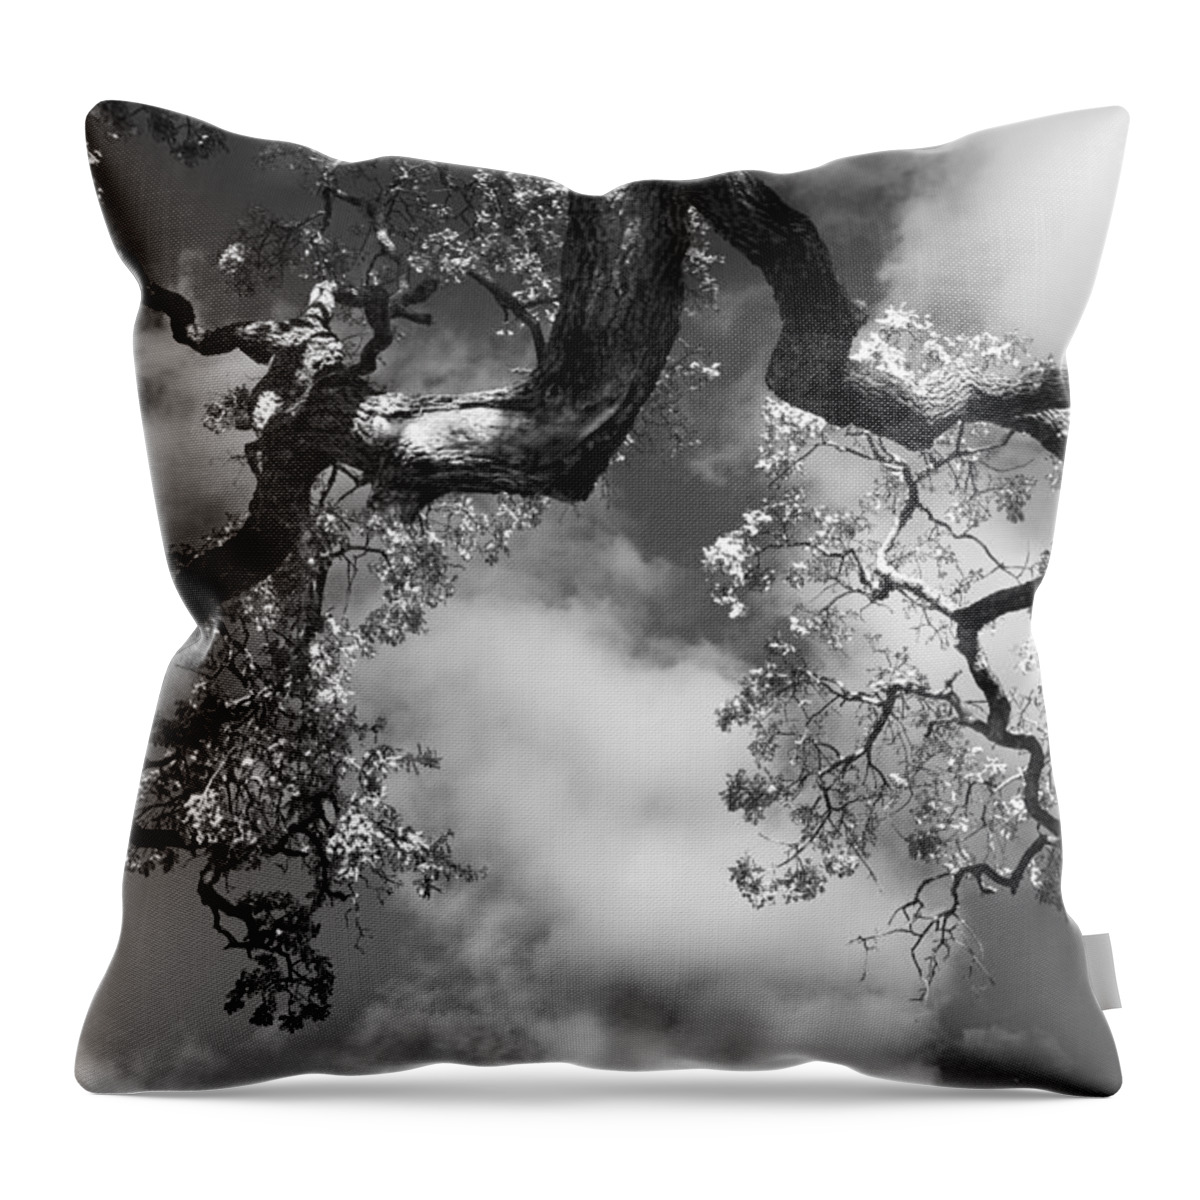 Oak Tree Throw Pillow featuring the photograph Cloudy Oak by Laurie Search